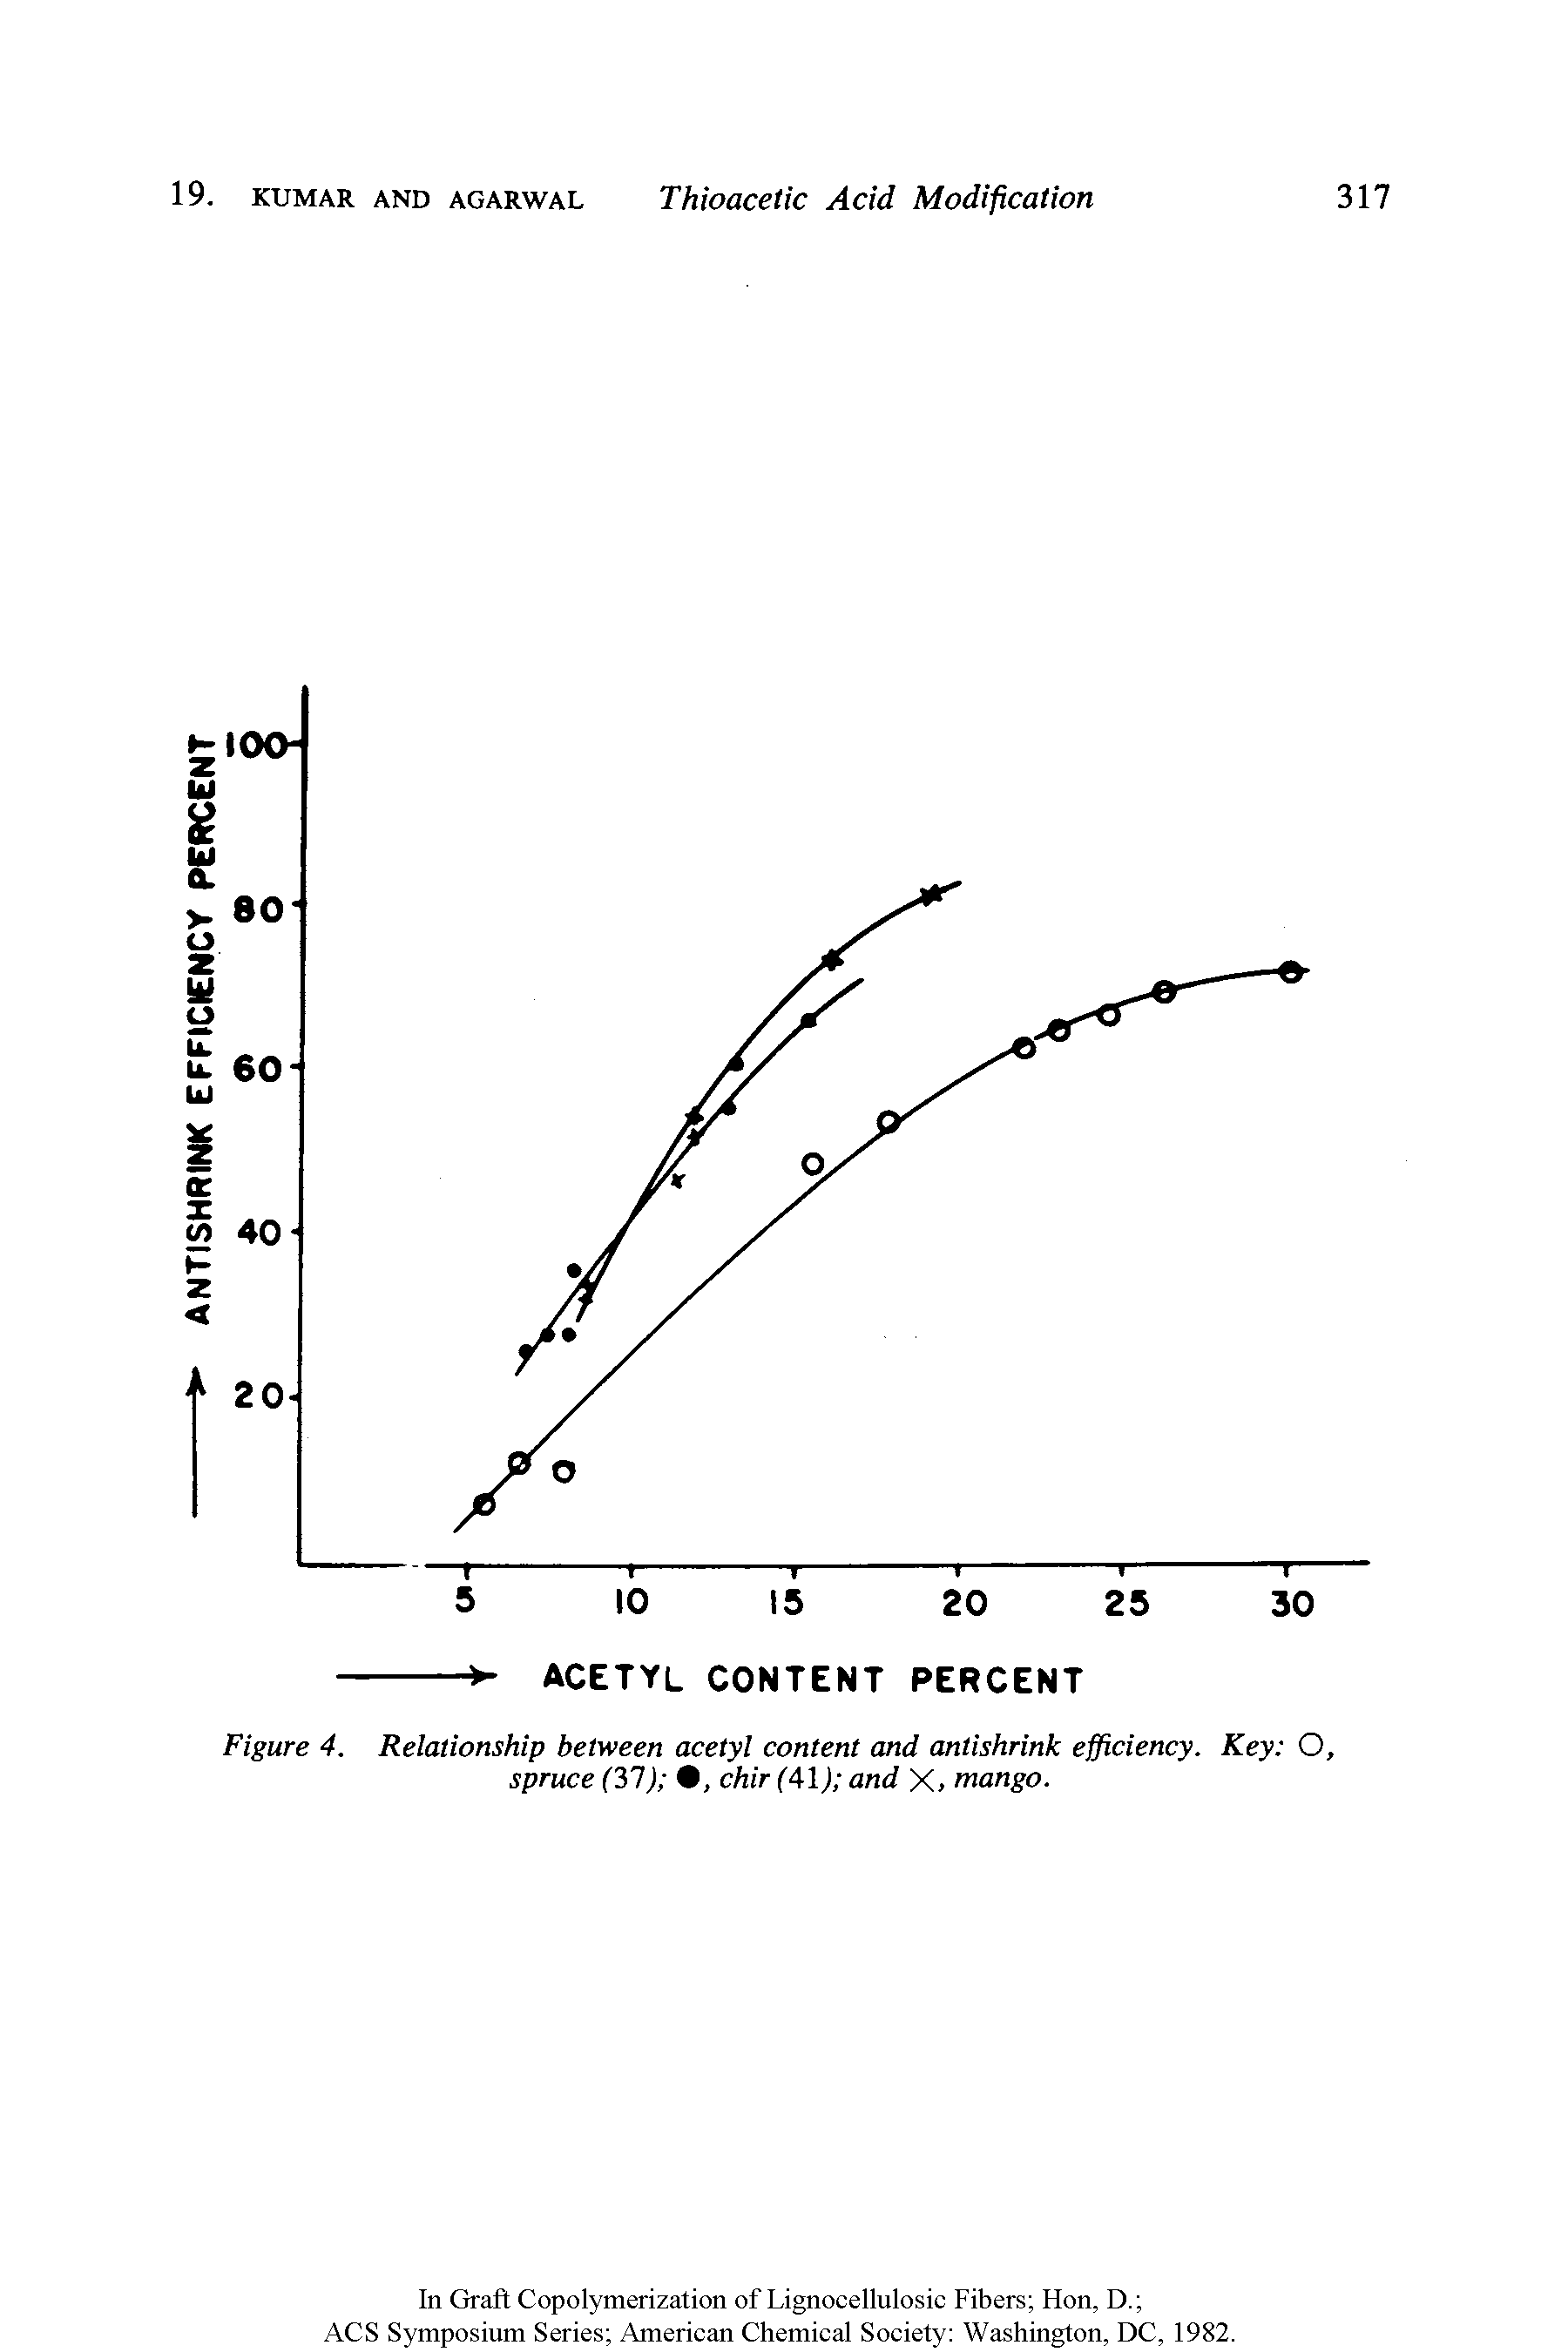 Figure 4. Relationship between acetyl content and antishrink efficiency. Key O, spruce (31) > chir (41) and X> mango.